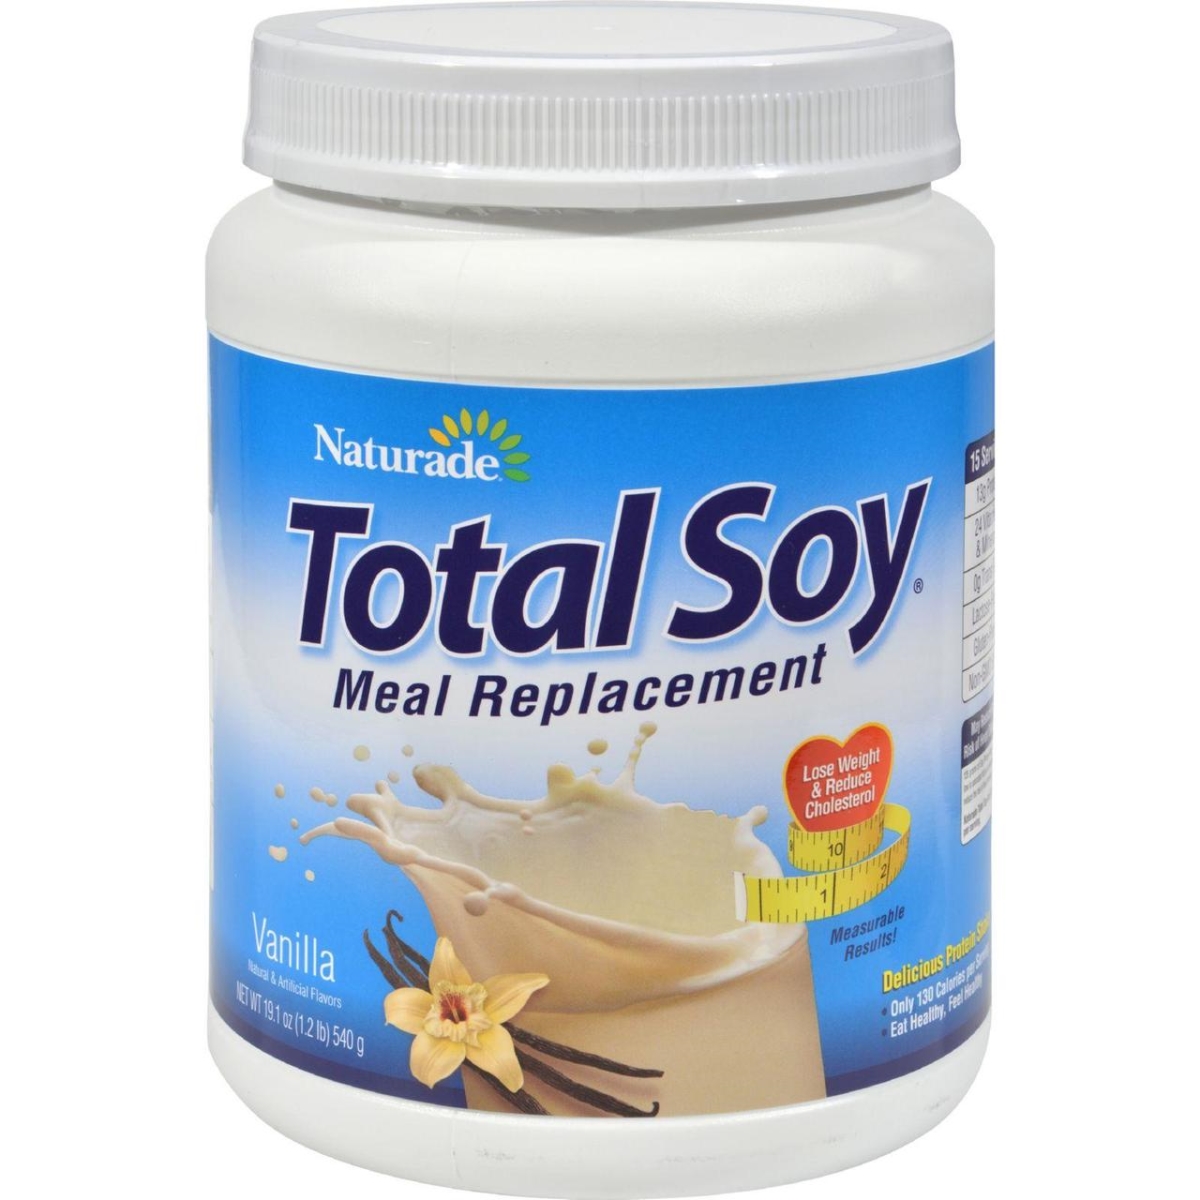 Hg0950667 19.05 Oz Total Soy Meal Replacement - Vanilla